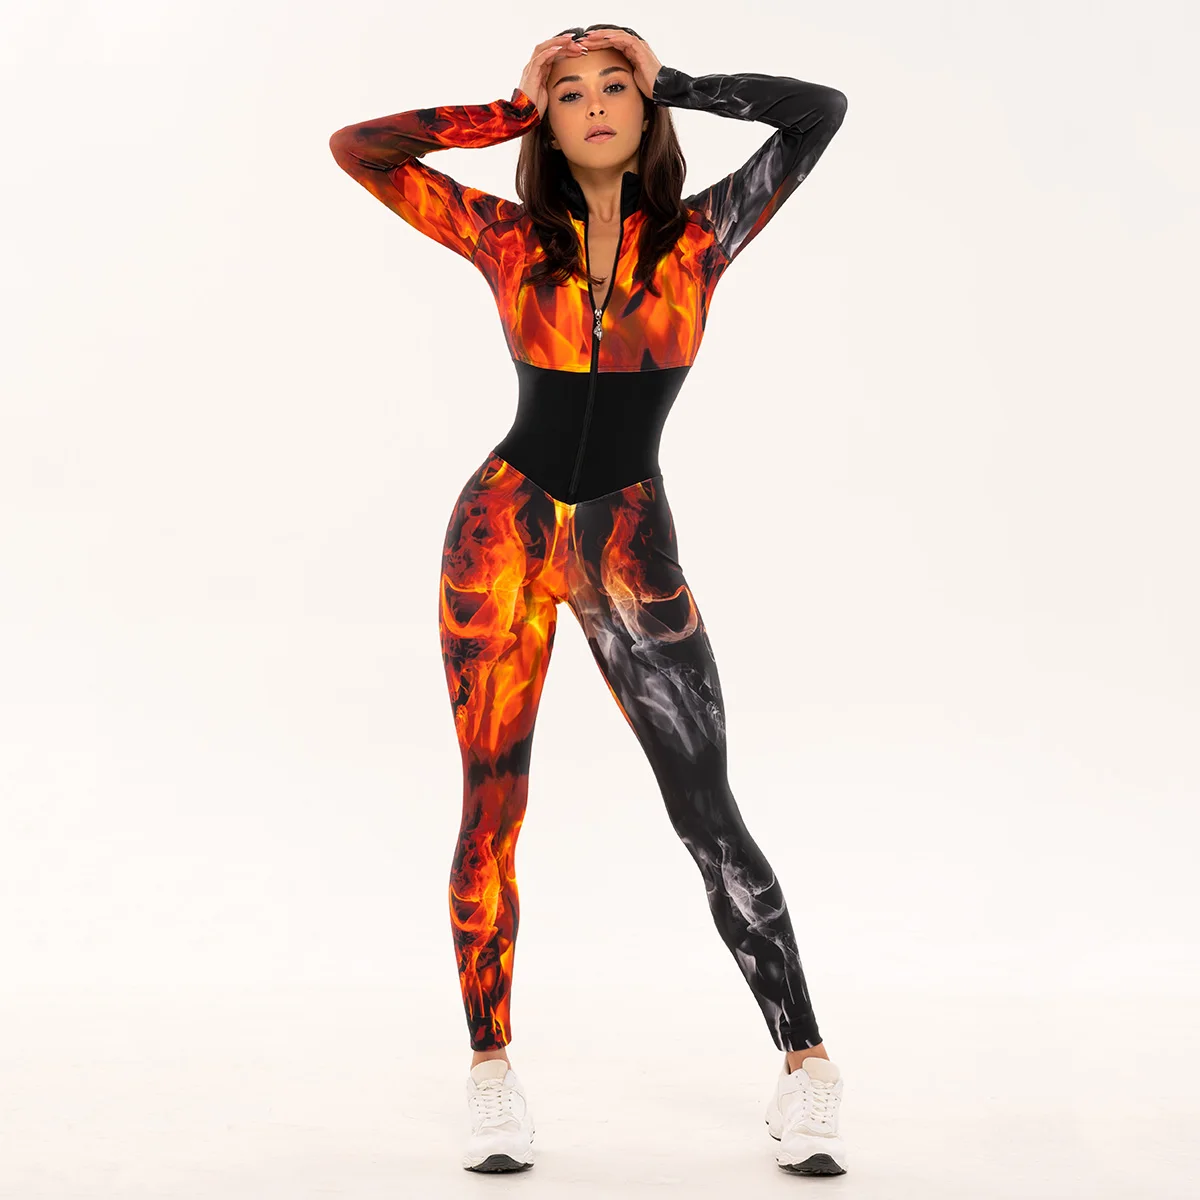 Oshoplive Fire Printed Long Sleeves Zipper Sports Jumpsuits For Women Sports Gym One Piece Jumpsuit new 1 6 years old children s shoes autumn kids net shoes super fire coconut shoes sports shoes with lamp soles